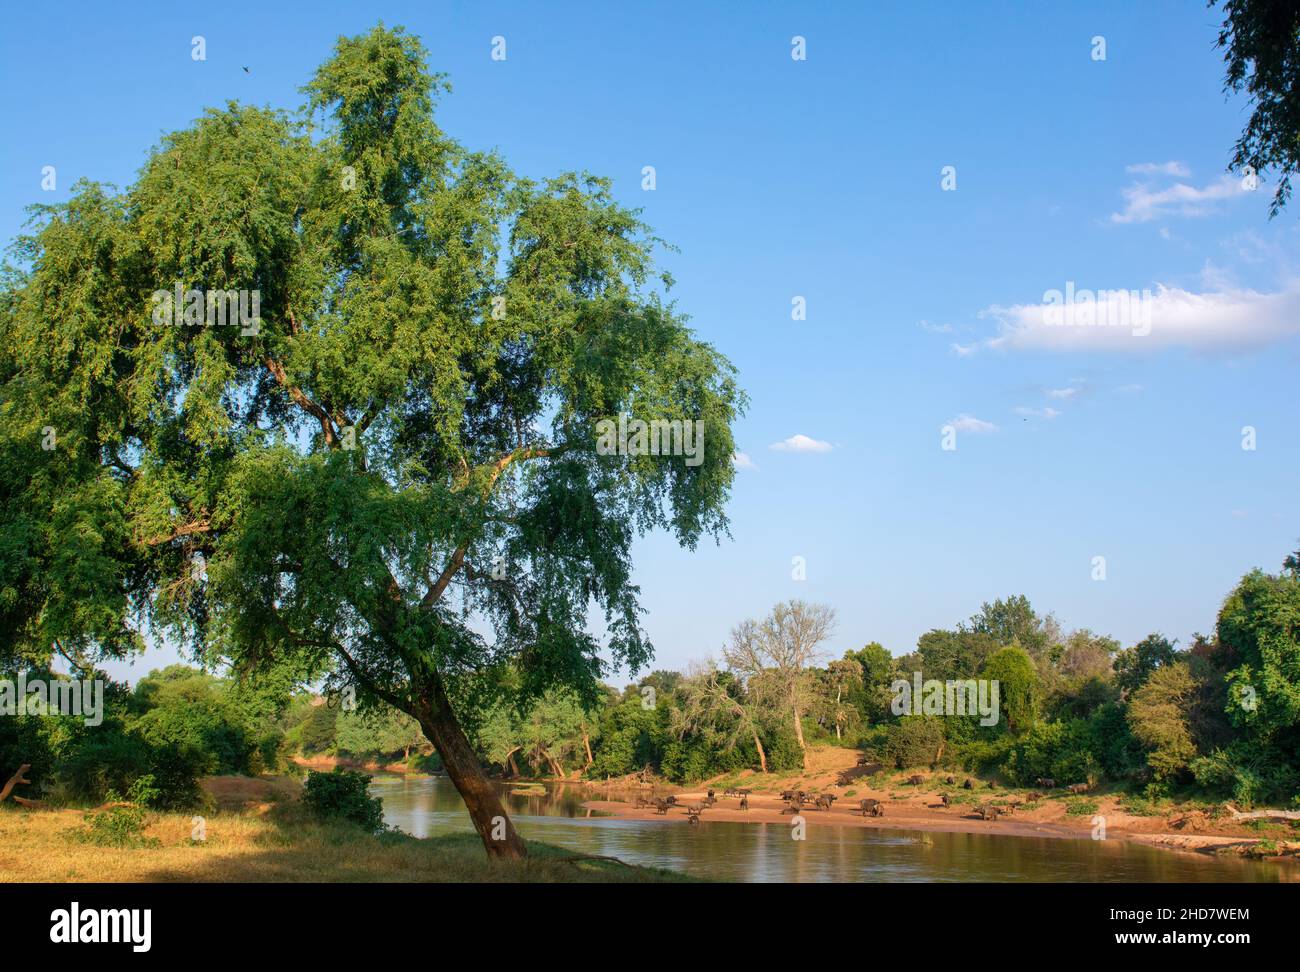 Evening along The Luvuvhu River in Northern Kruger, South Africa Stock Photo